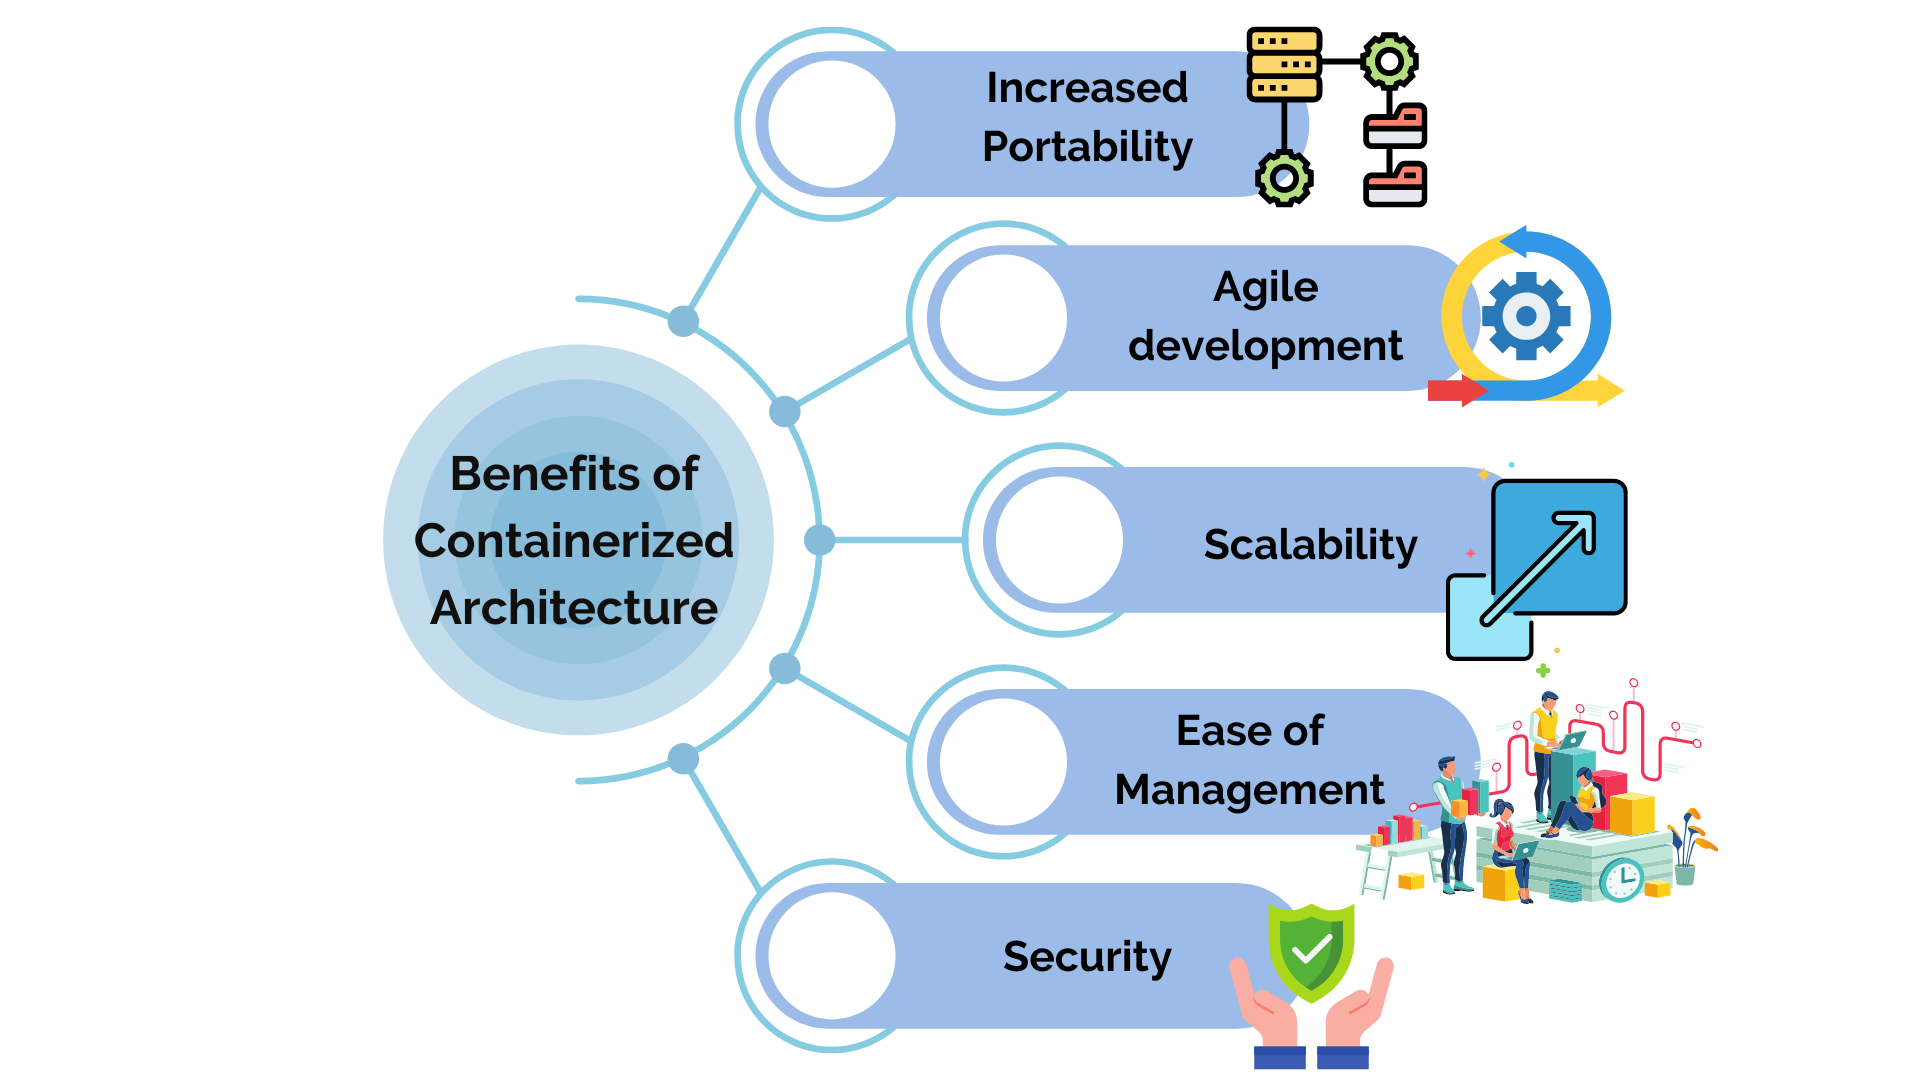 Benefits of Containerized Architecture